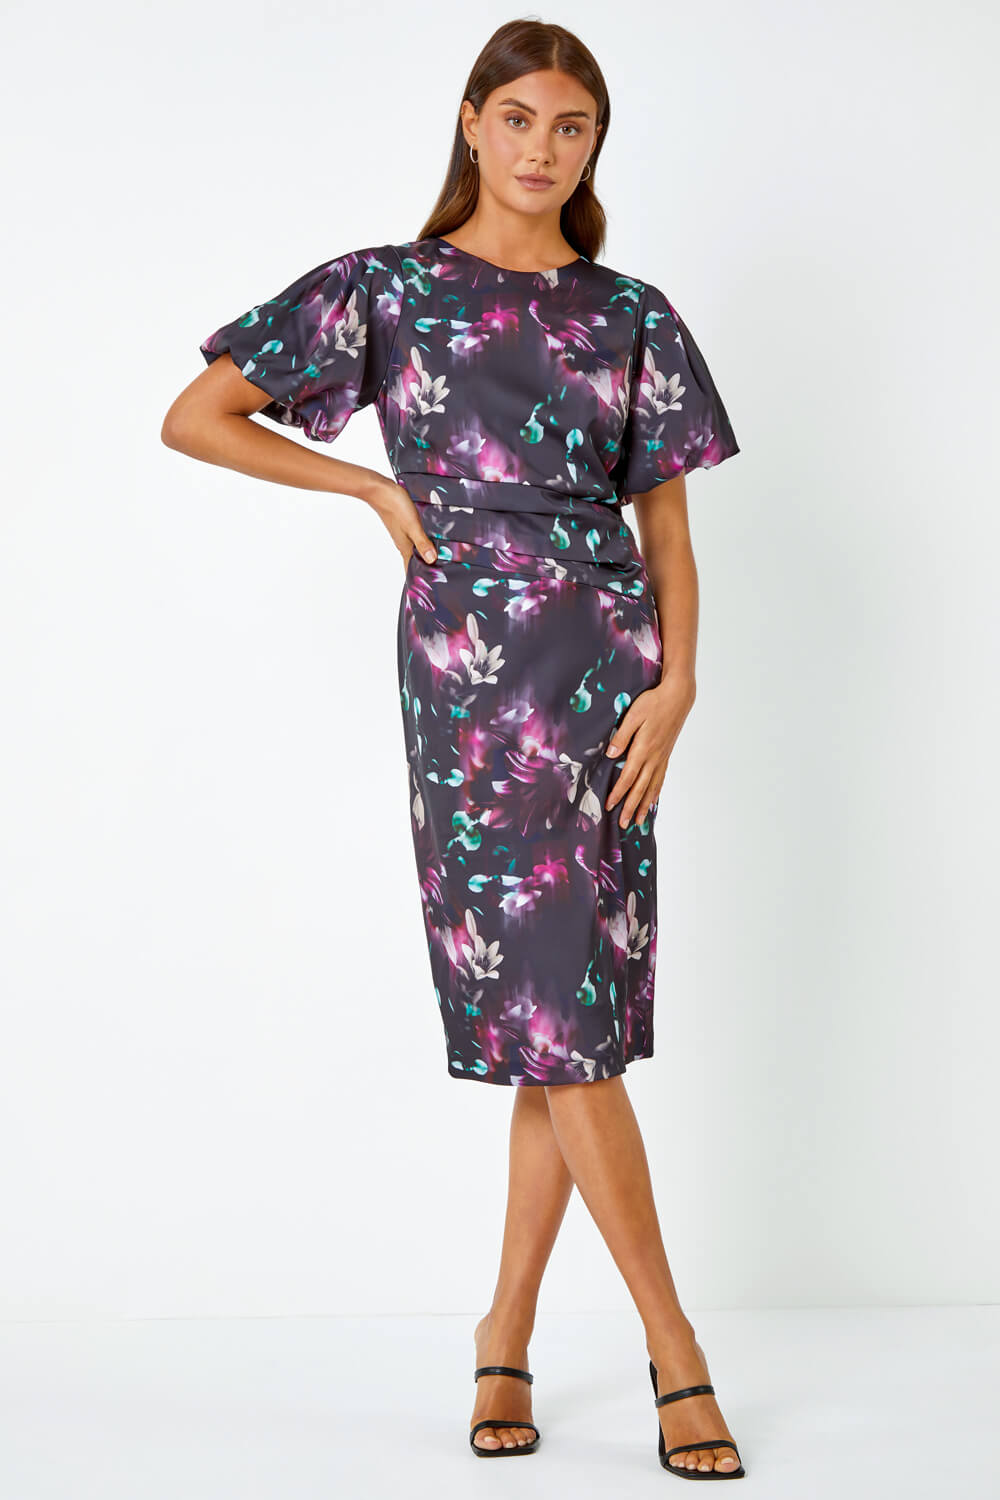 Black Floral Puff Sleeve Ruched Stretch Dress, Image 2 of 5